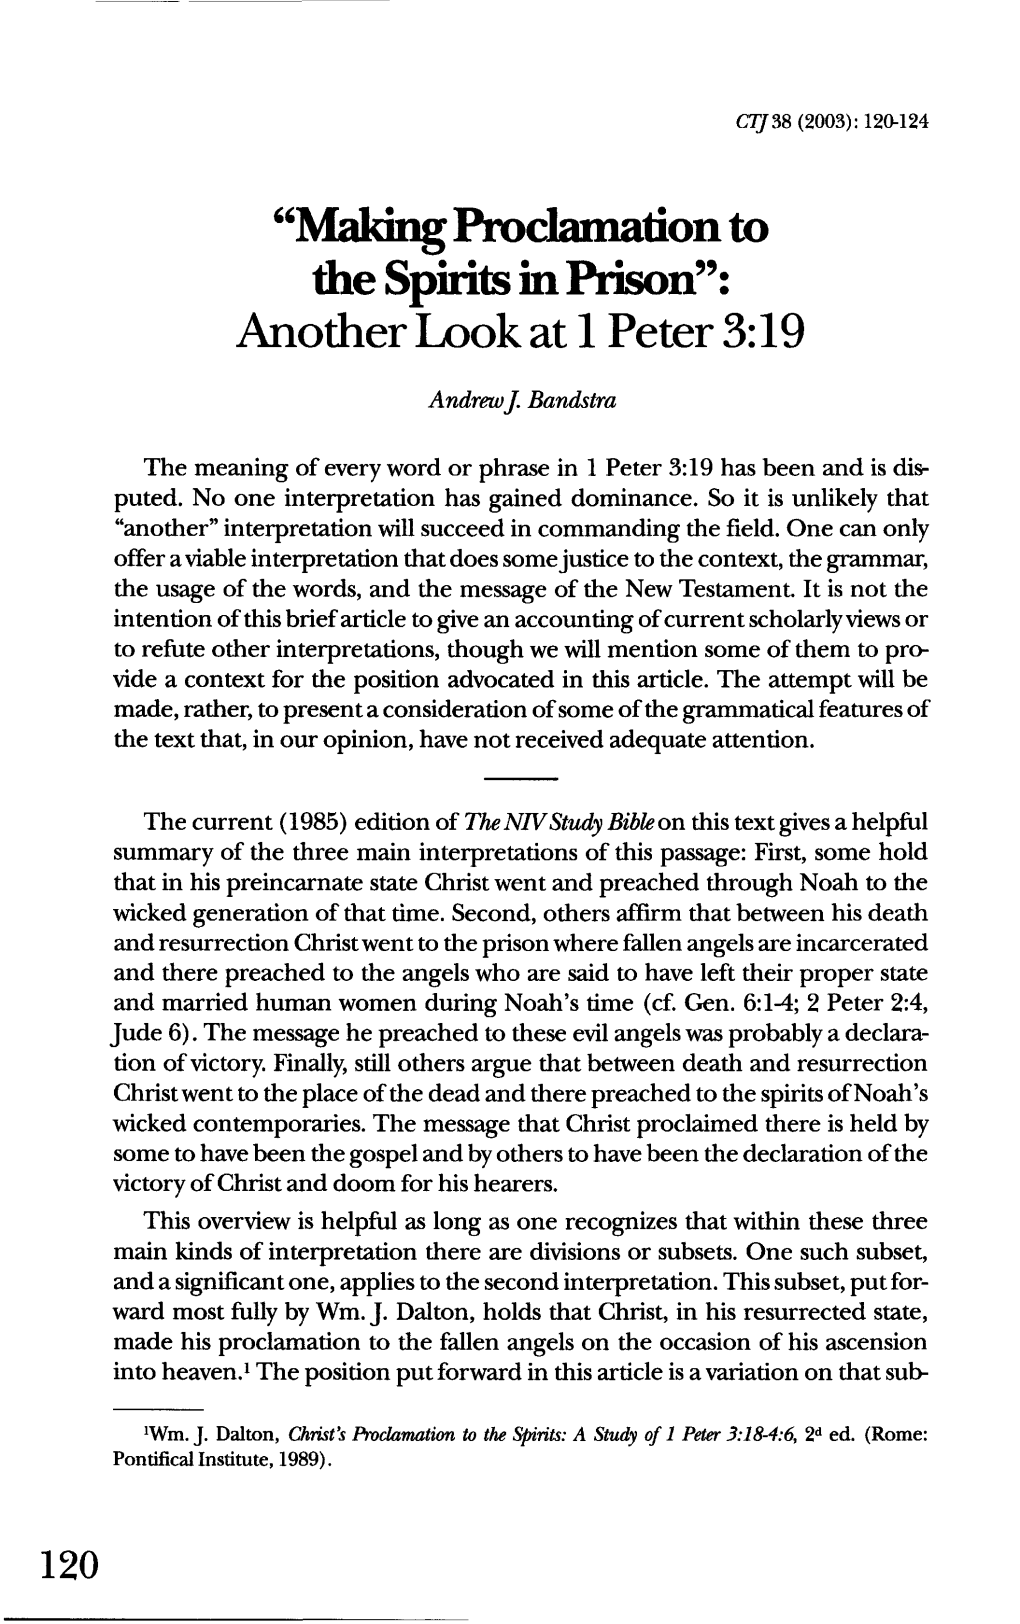 "Making Proclamation to the Spirits in Prison": Another Look at 1 Peter 3:19 Andrew J